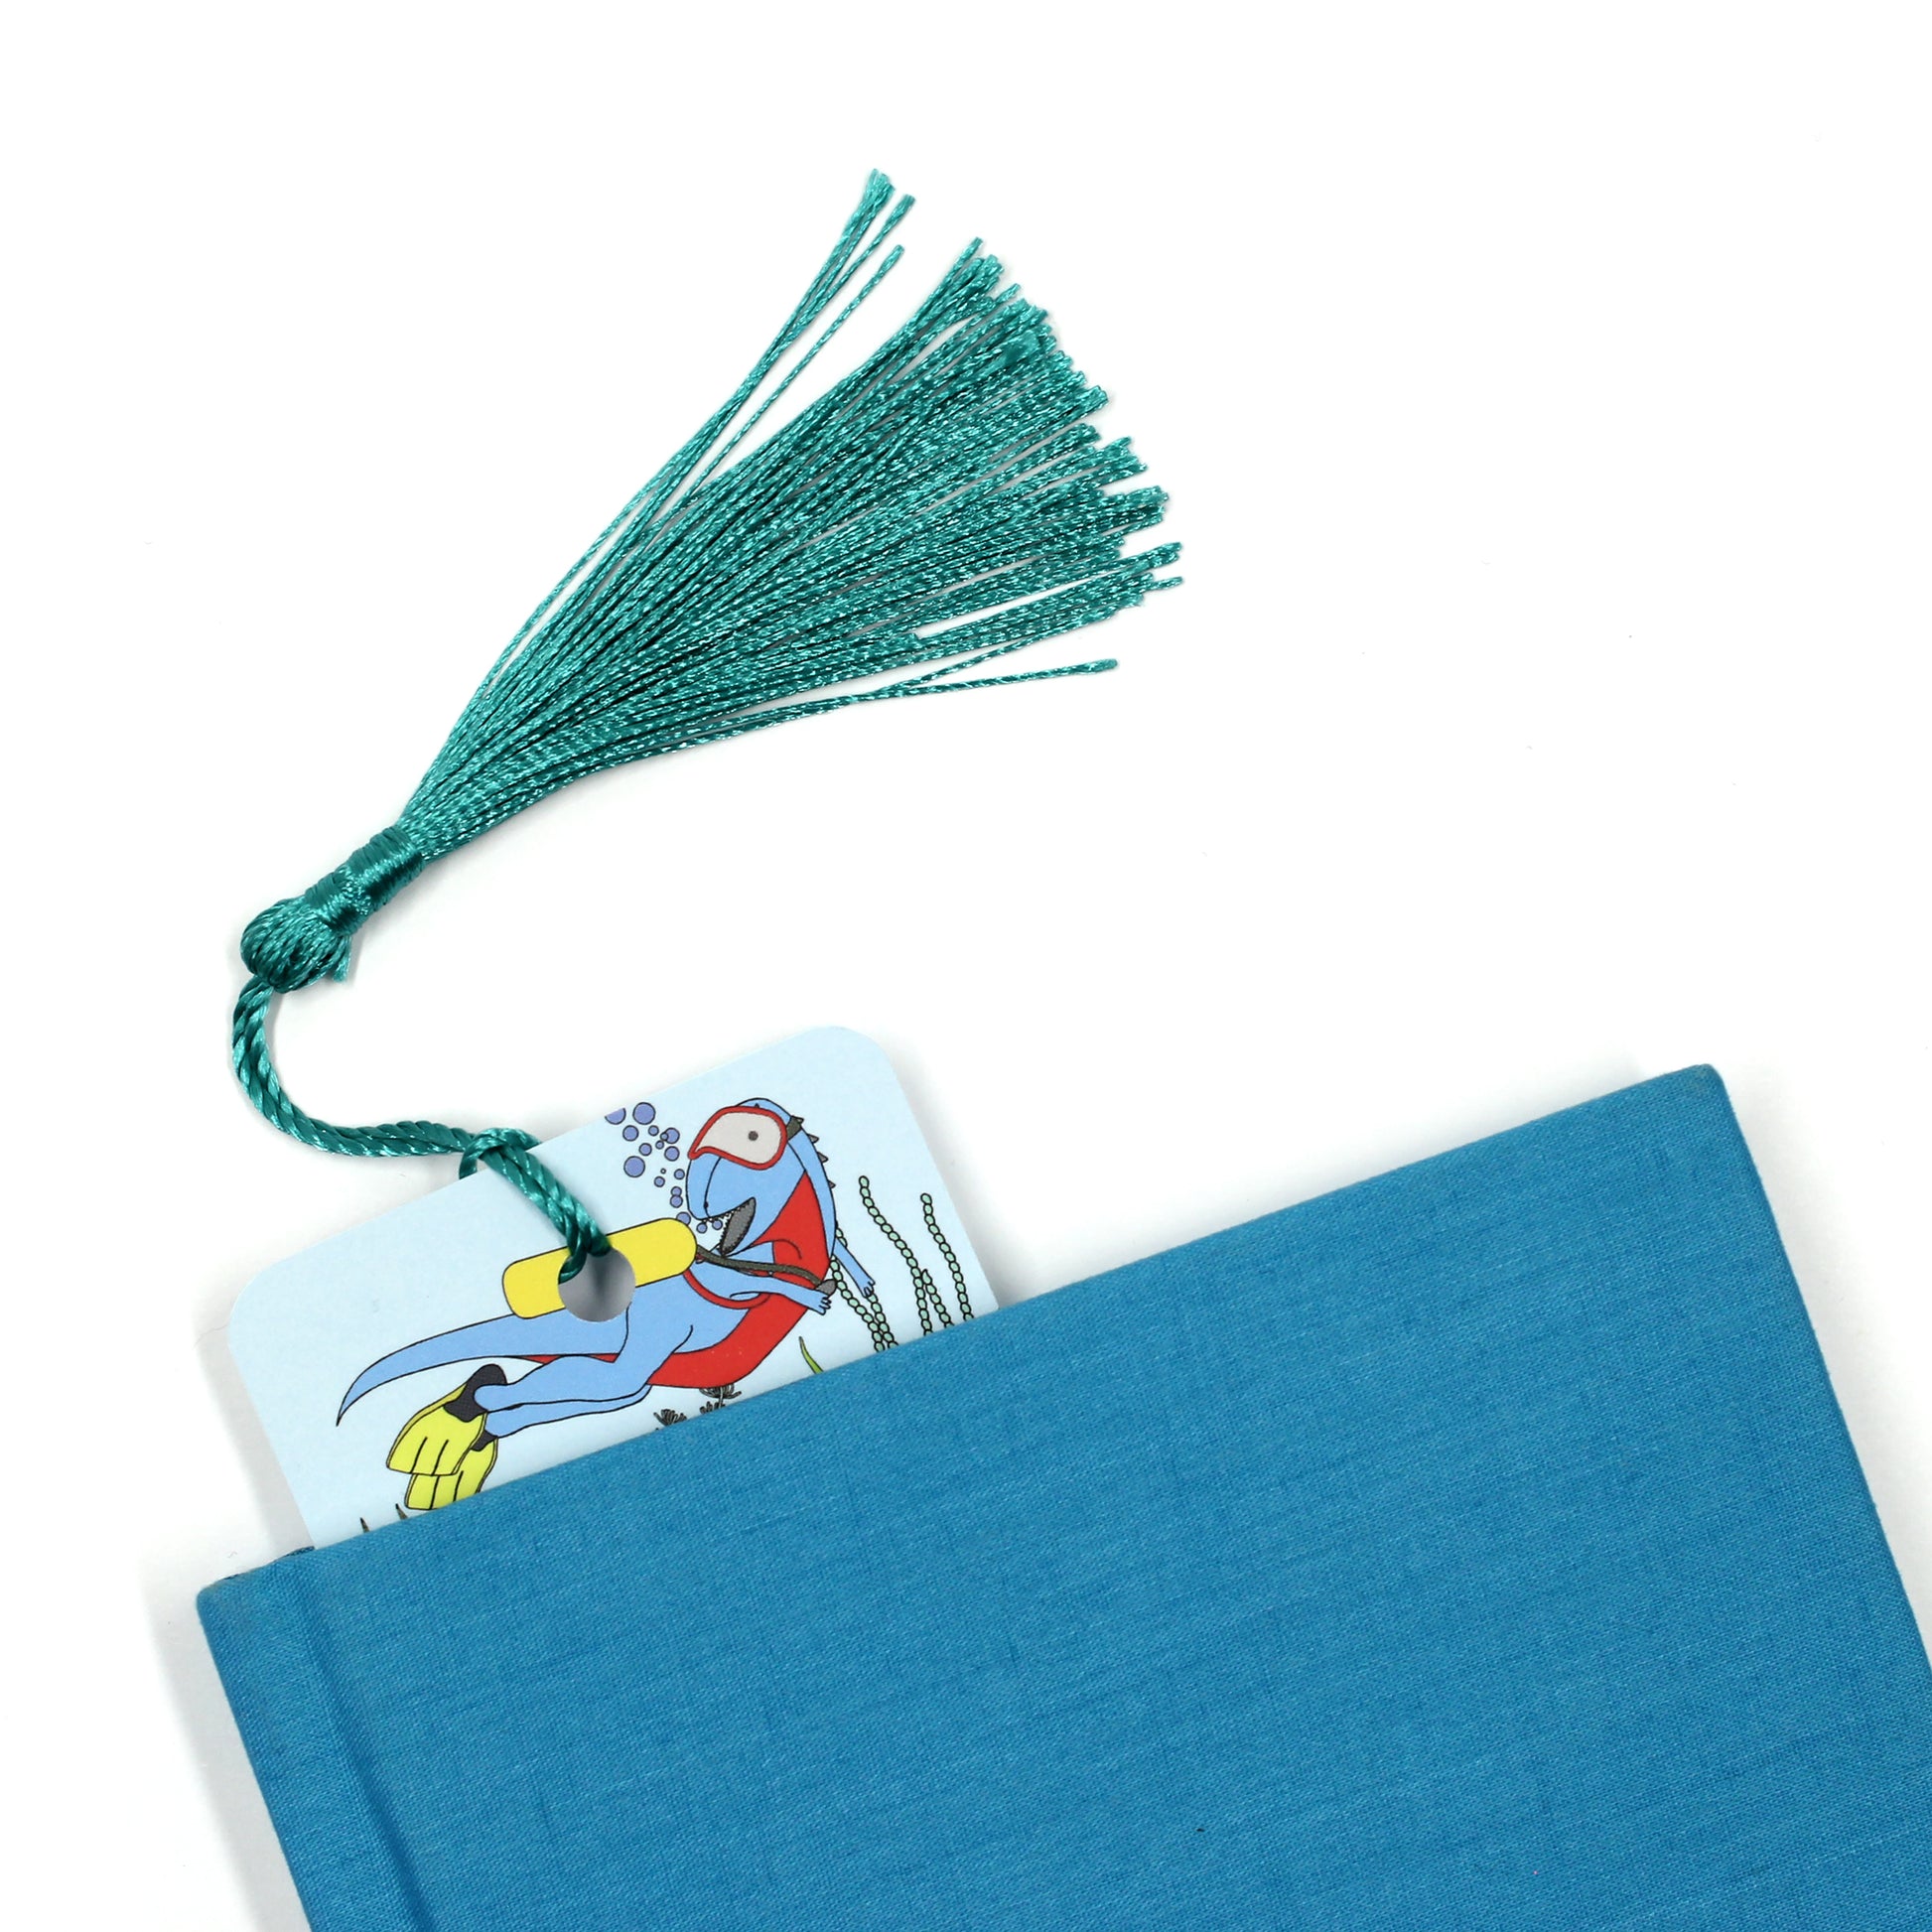 under the sea dinosaur bookmark with tassel coming out of blue book